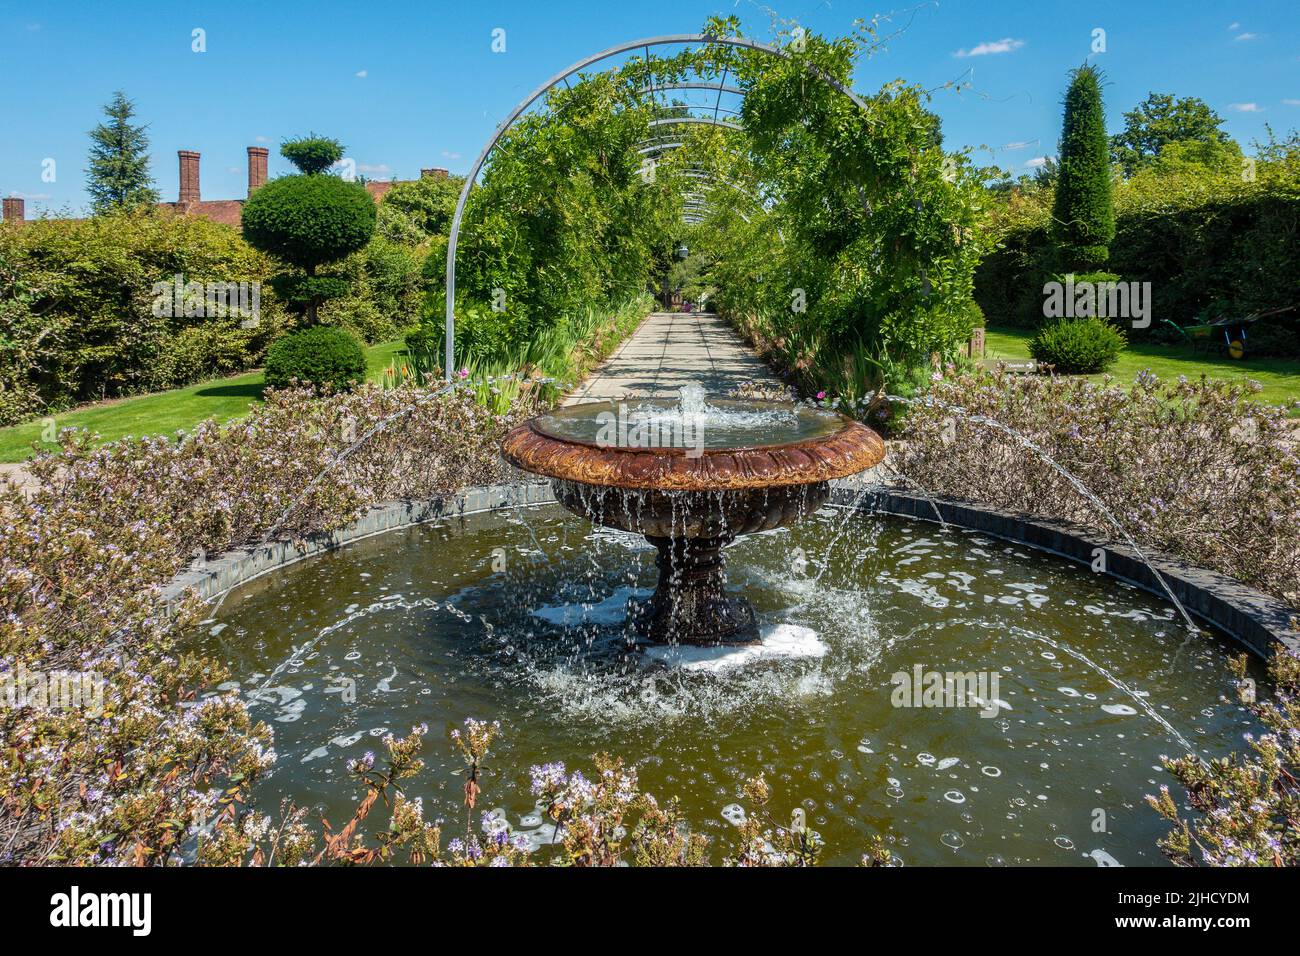 The Fountain in the Cottage Garden RHS Wisley Gardens Wisley England UK Stock Photo